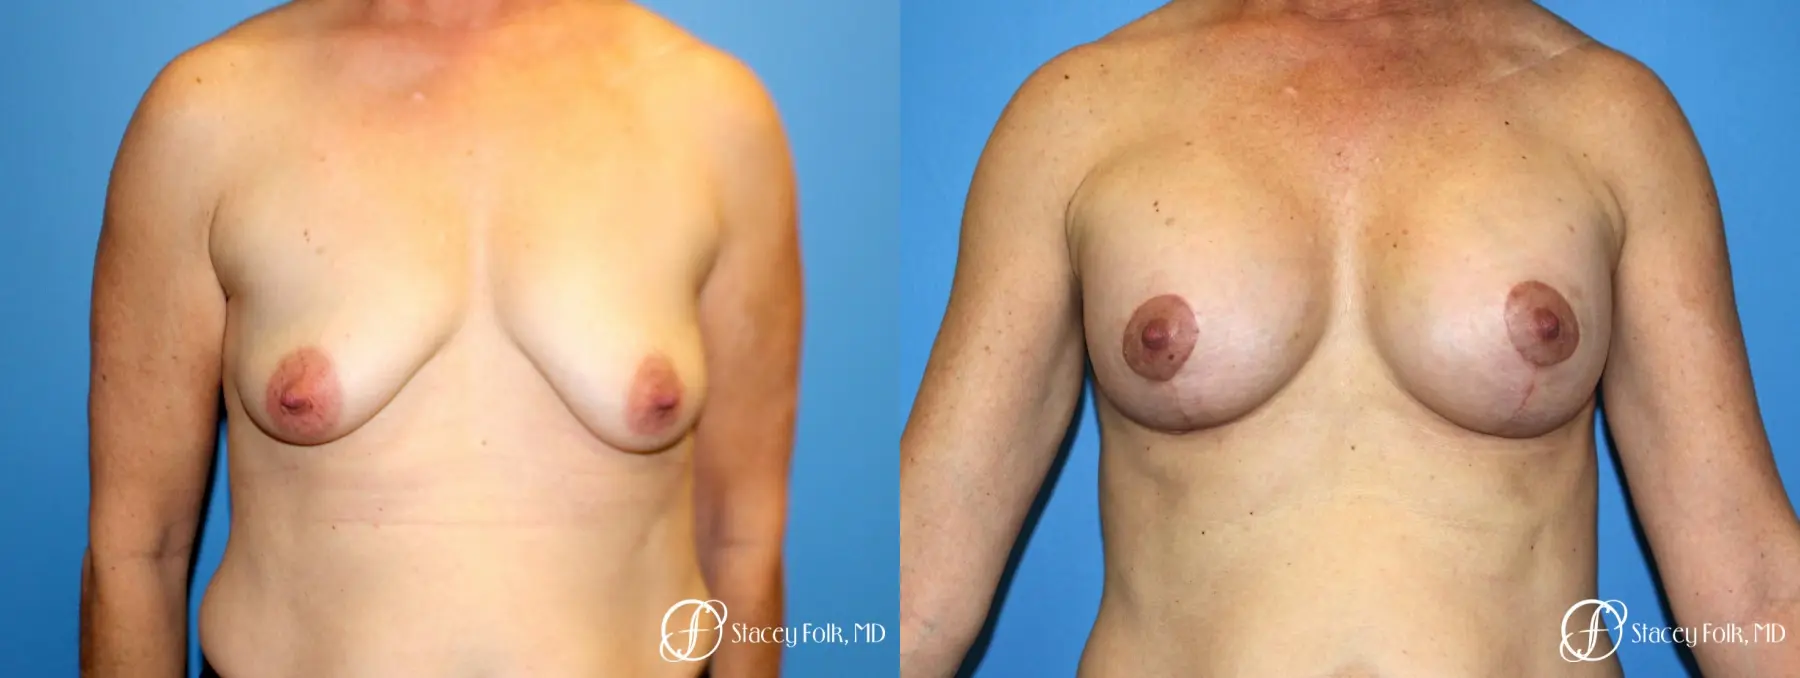 Denver Breast Augmentation Mastopexy 8163 - Before and After